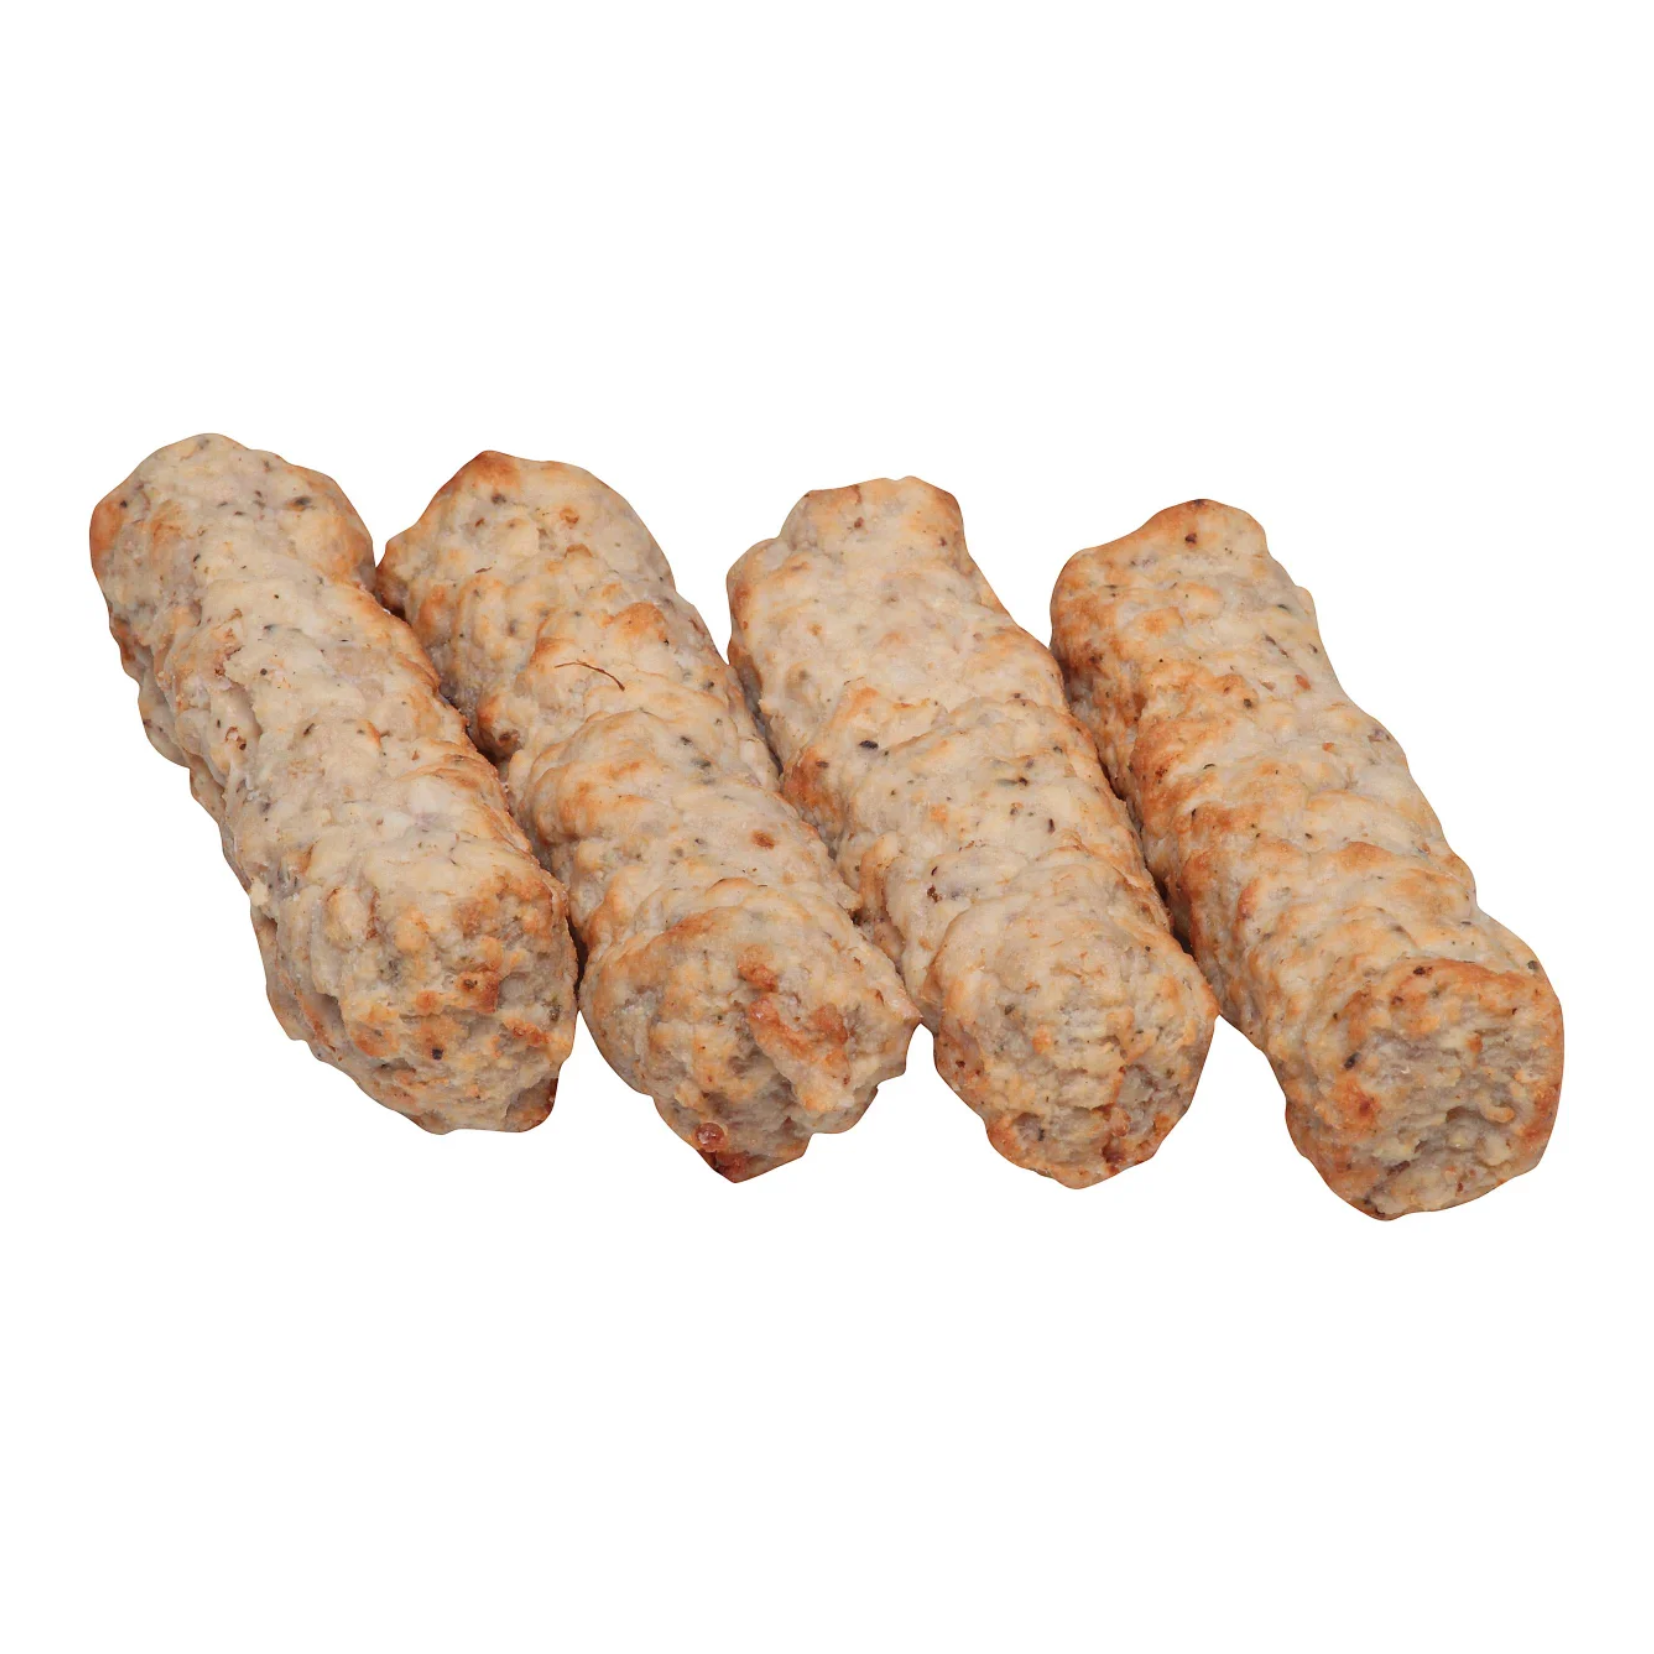 Jimmy Dean Fully Cooked Pork Sausage Links 20ct